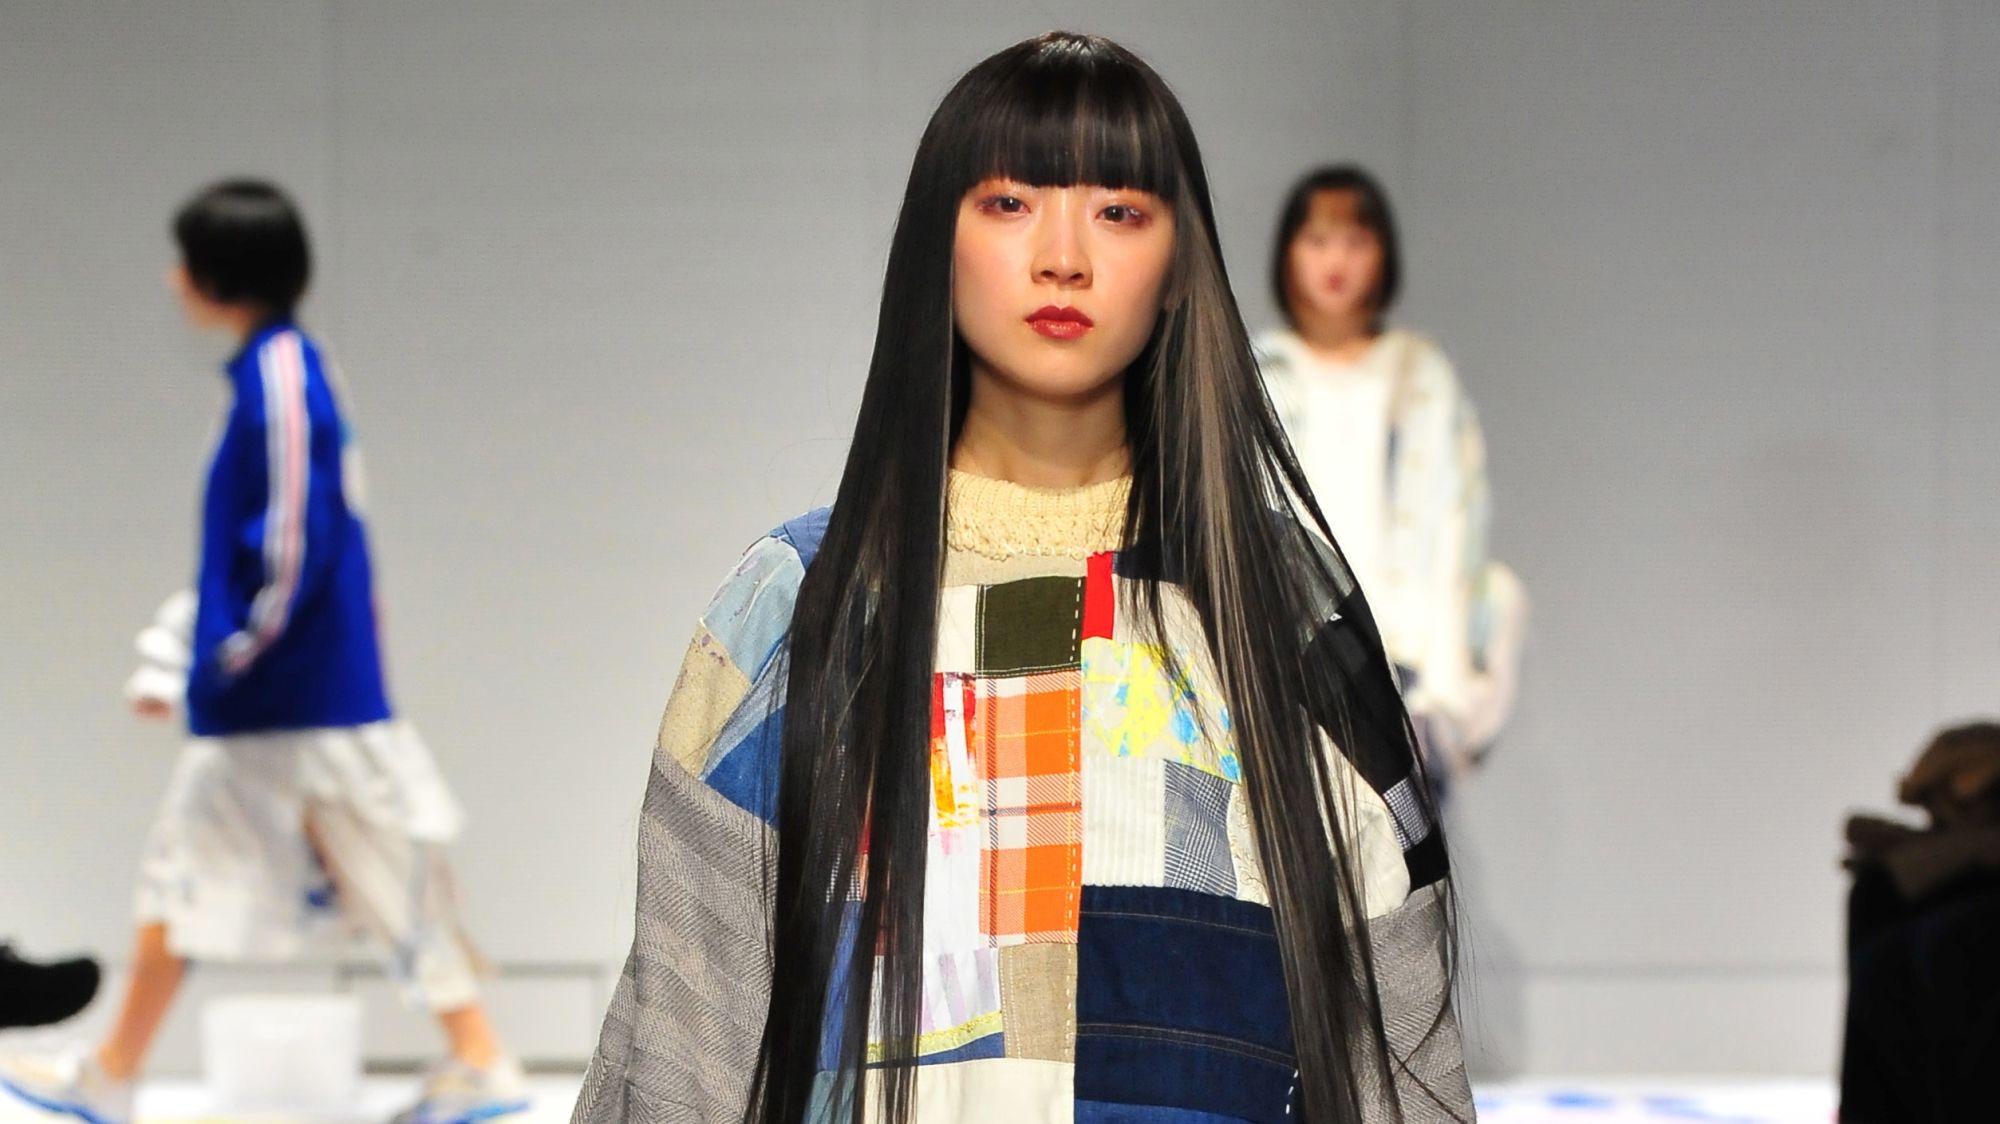 With tradition and new tech, these Japanese designers are crafting more  sustainably made clothing